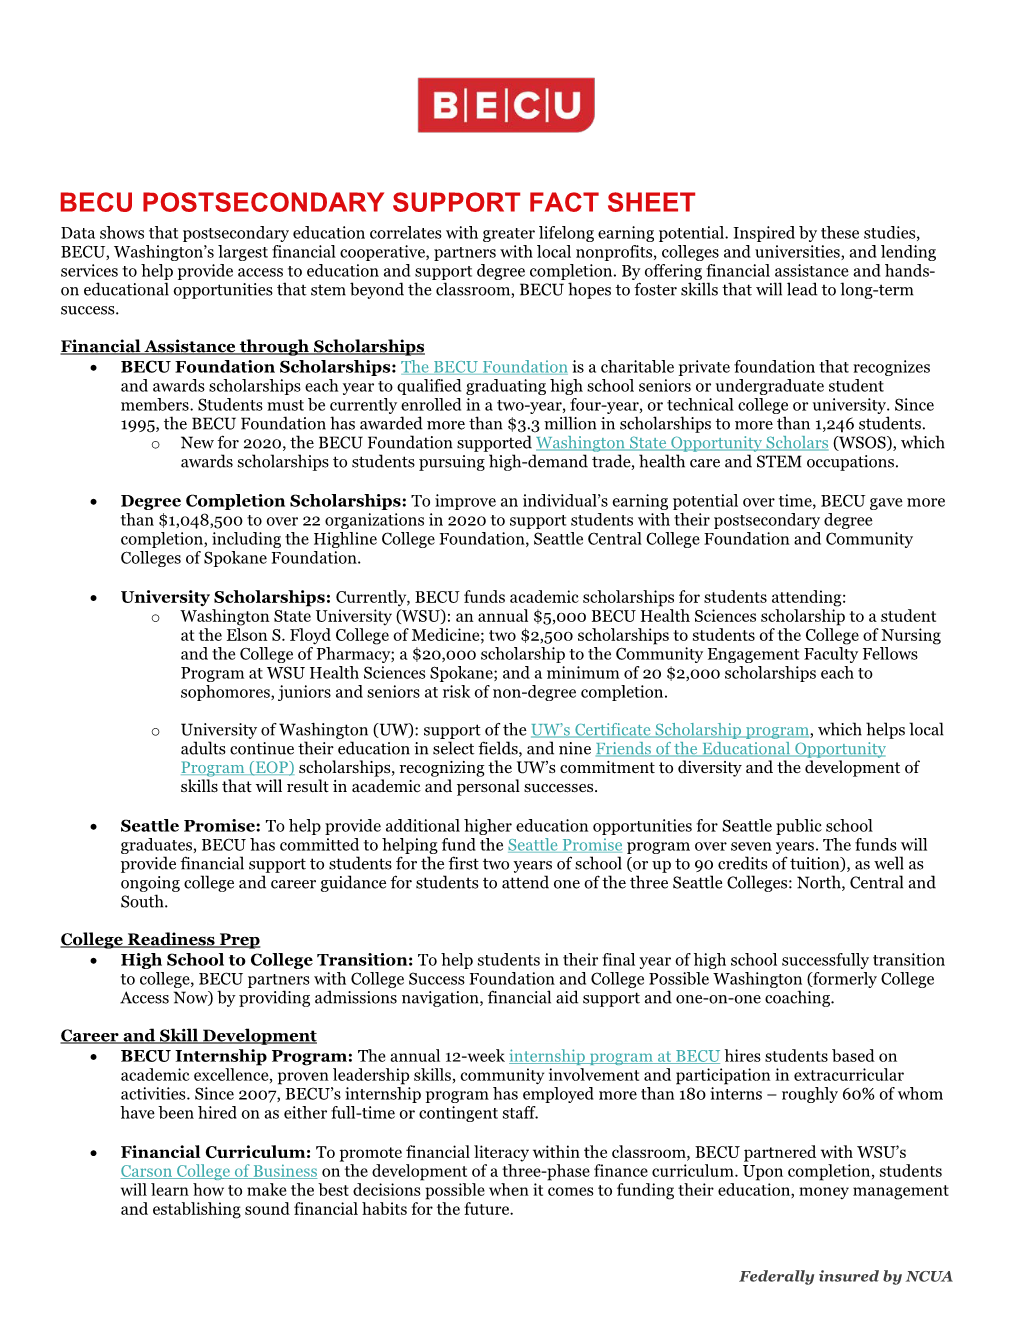 BECU POSTSECONDARY SUPPORT FACT SHEET Data Shows That Postsecondary Education Correlates with Greater Lifelong Earning Potential